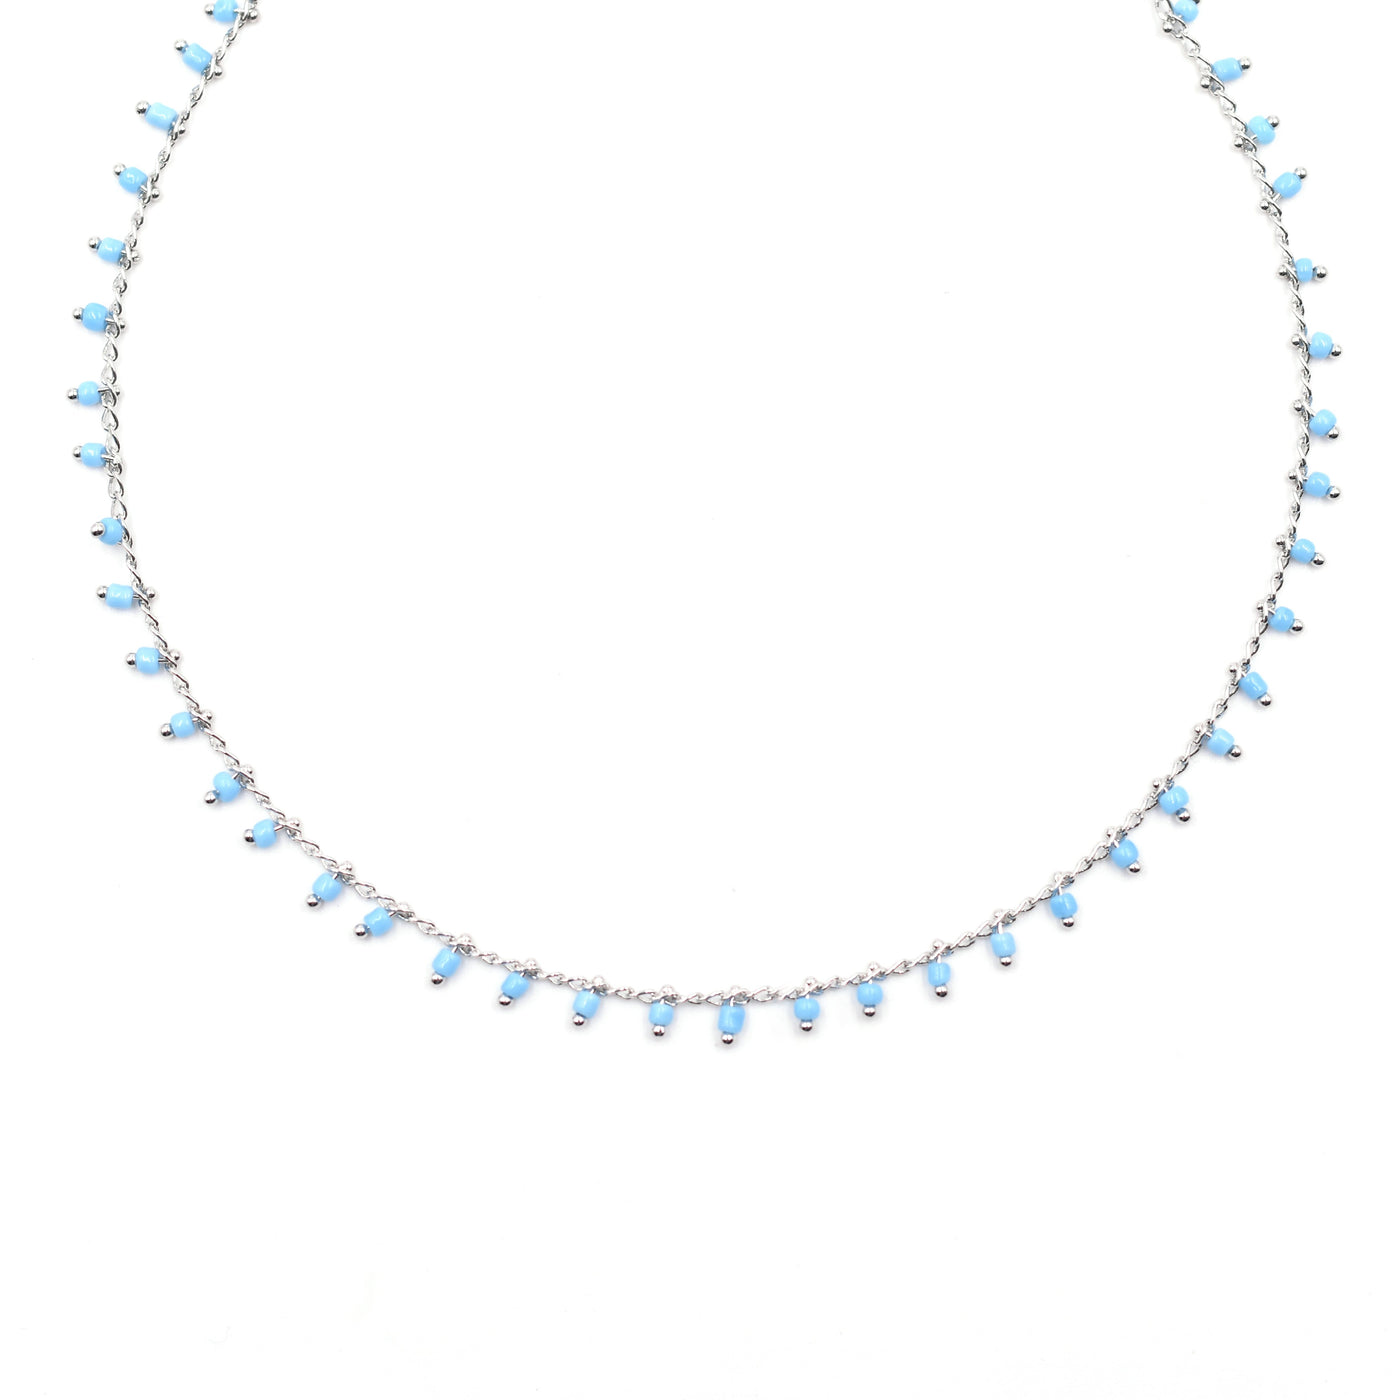 Topaz & Pearl Necklaces Turquoise Confetti Beaded Short Necklace